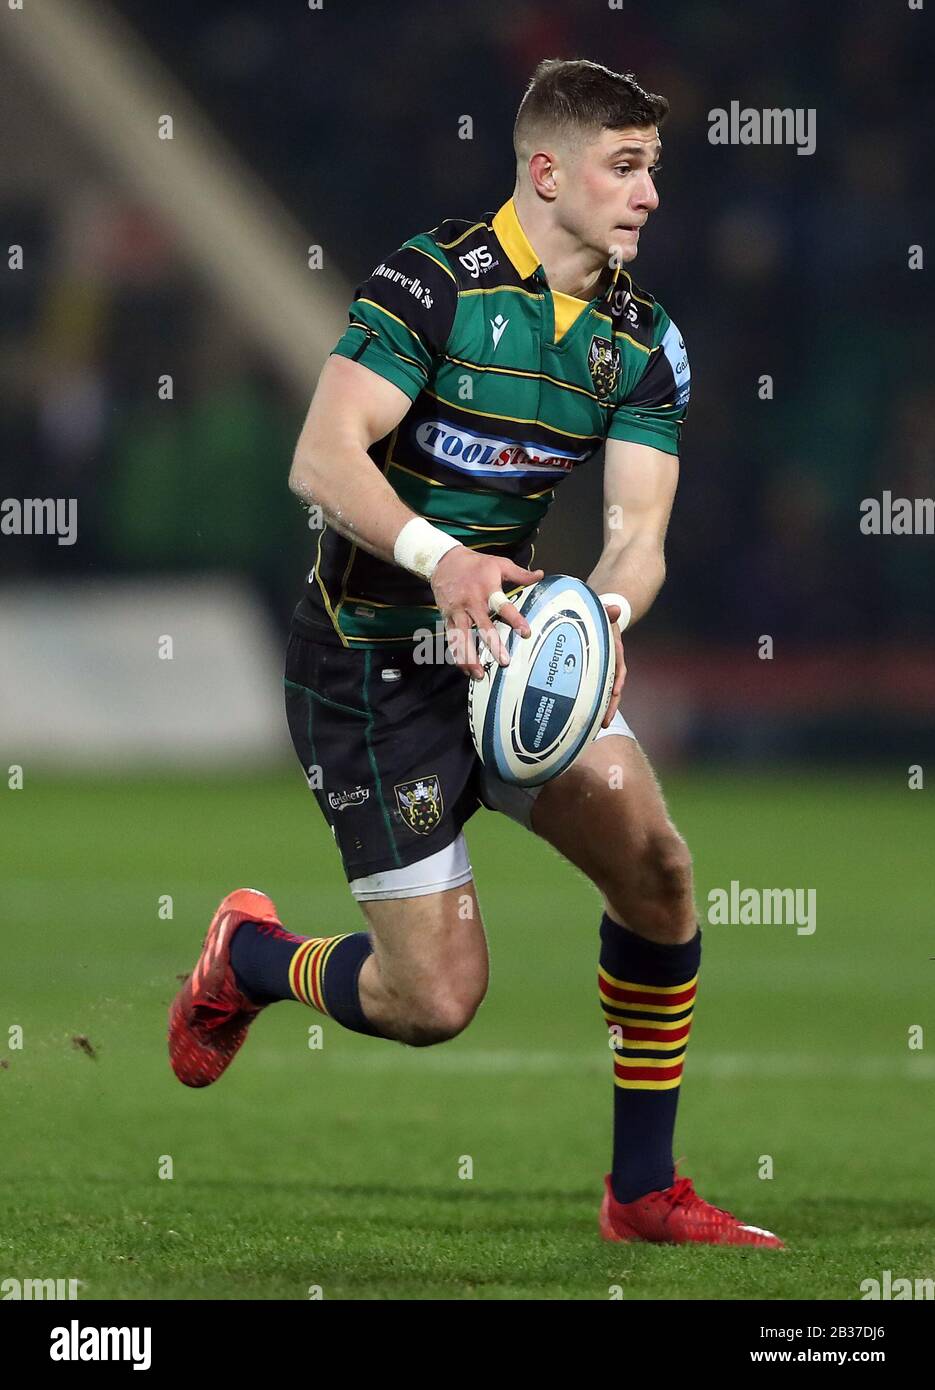 London Irish's James Grayson during the Gallagher Premiership match at Franklin's Gardens, Northampton. PA Photo. Picture date: Friday January 24, 2020. See PA story RUGBYU Northampton. Photo credit should read: David Davies/PA Wire. Stock Photo